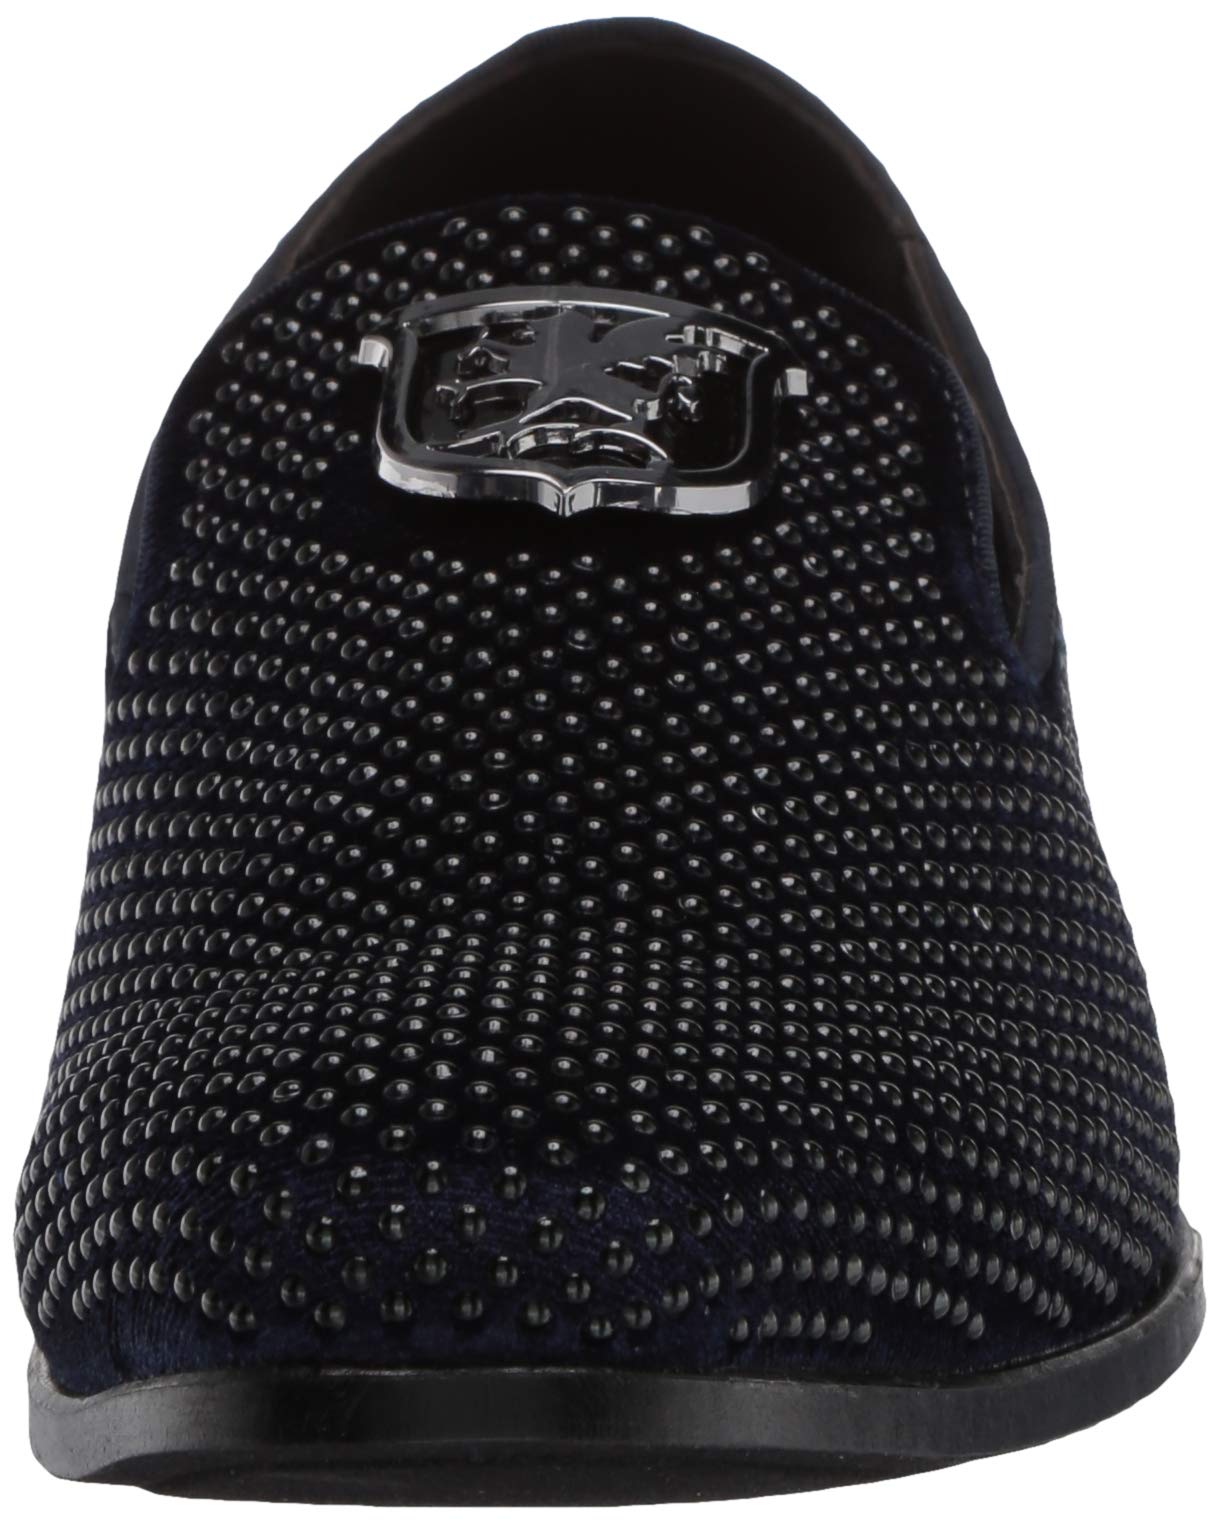 STACY ADAMS Men's Swagger Studded Ornament Slip-on Driving Style Loafer